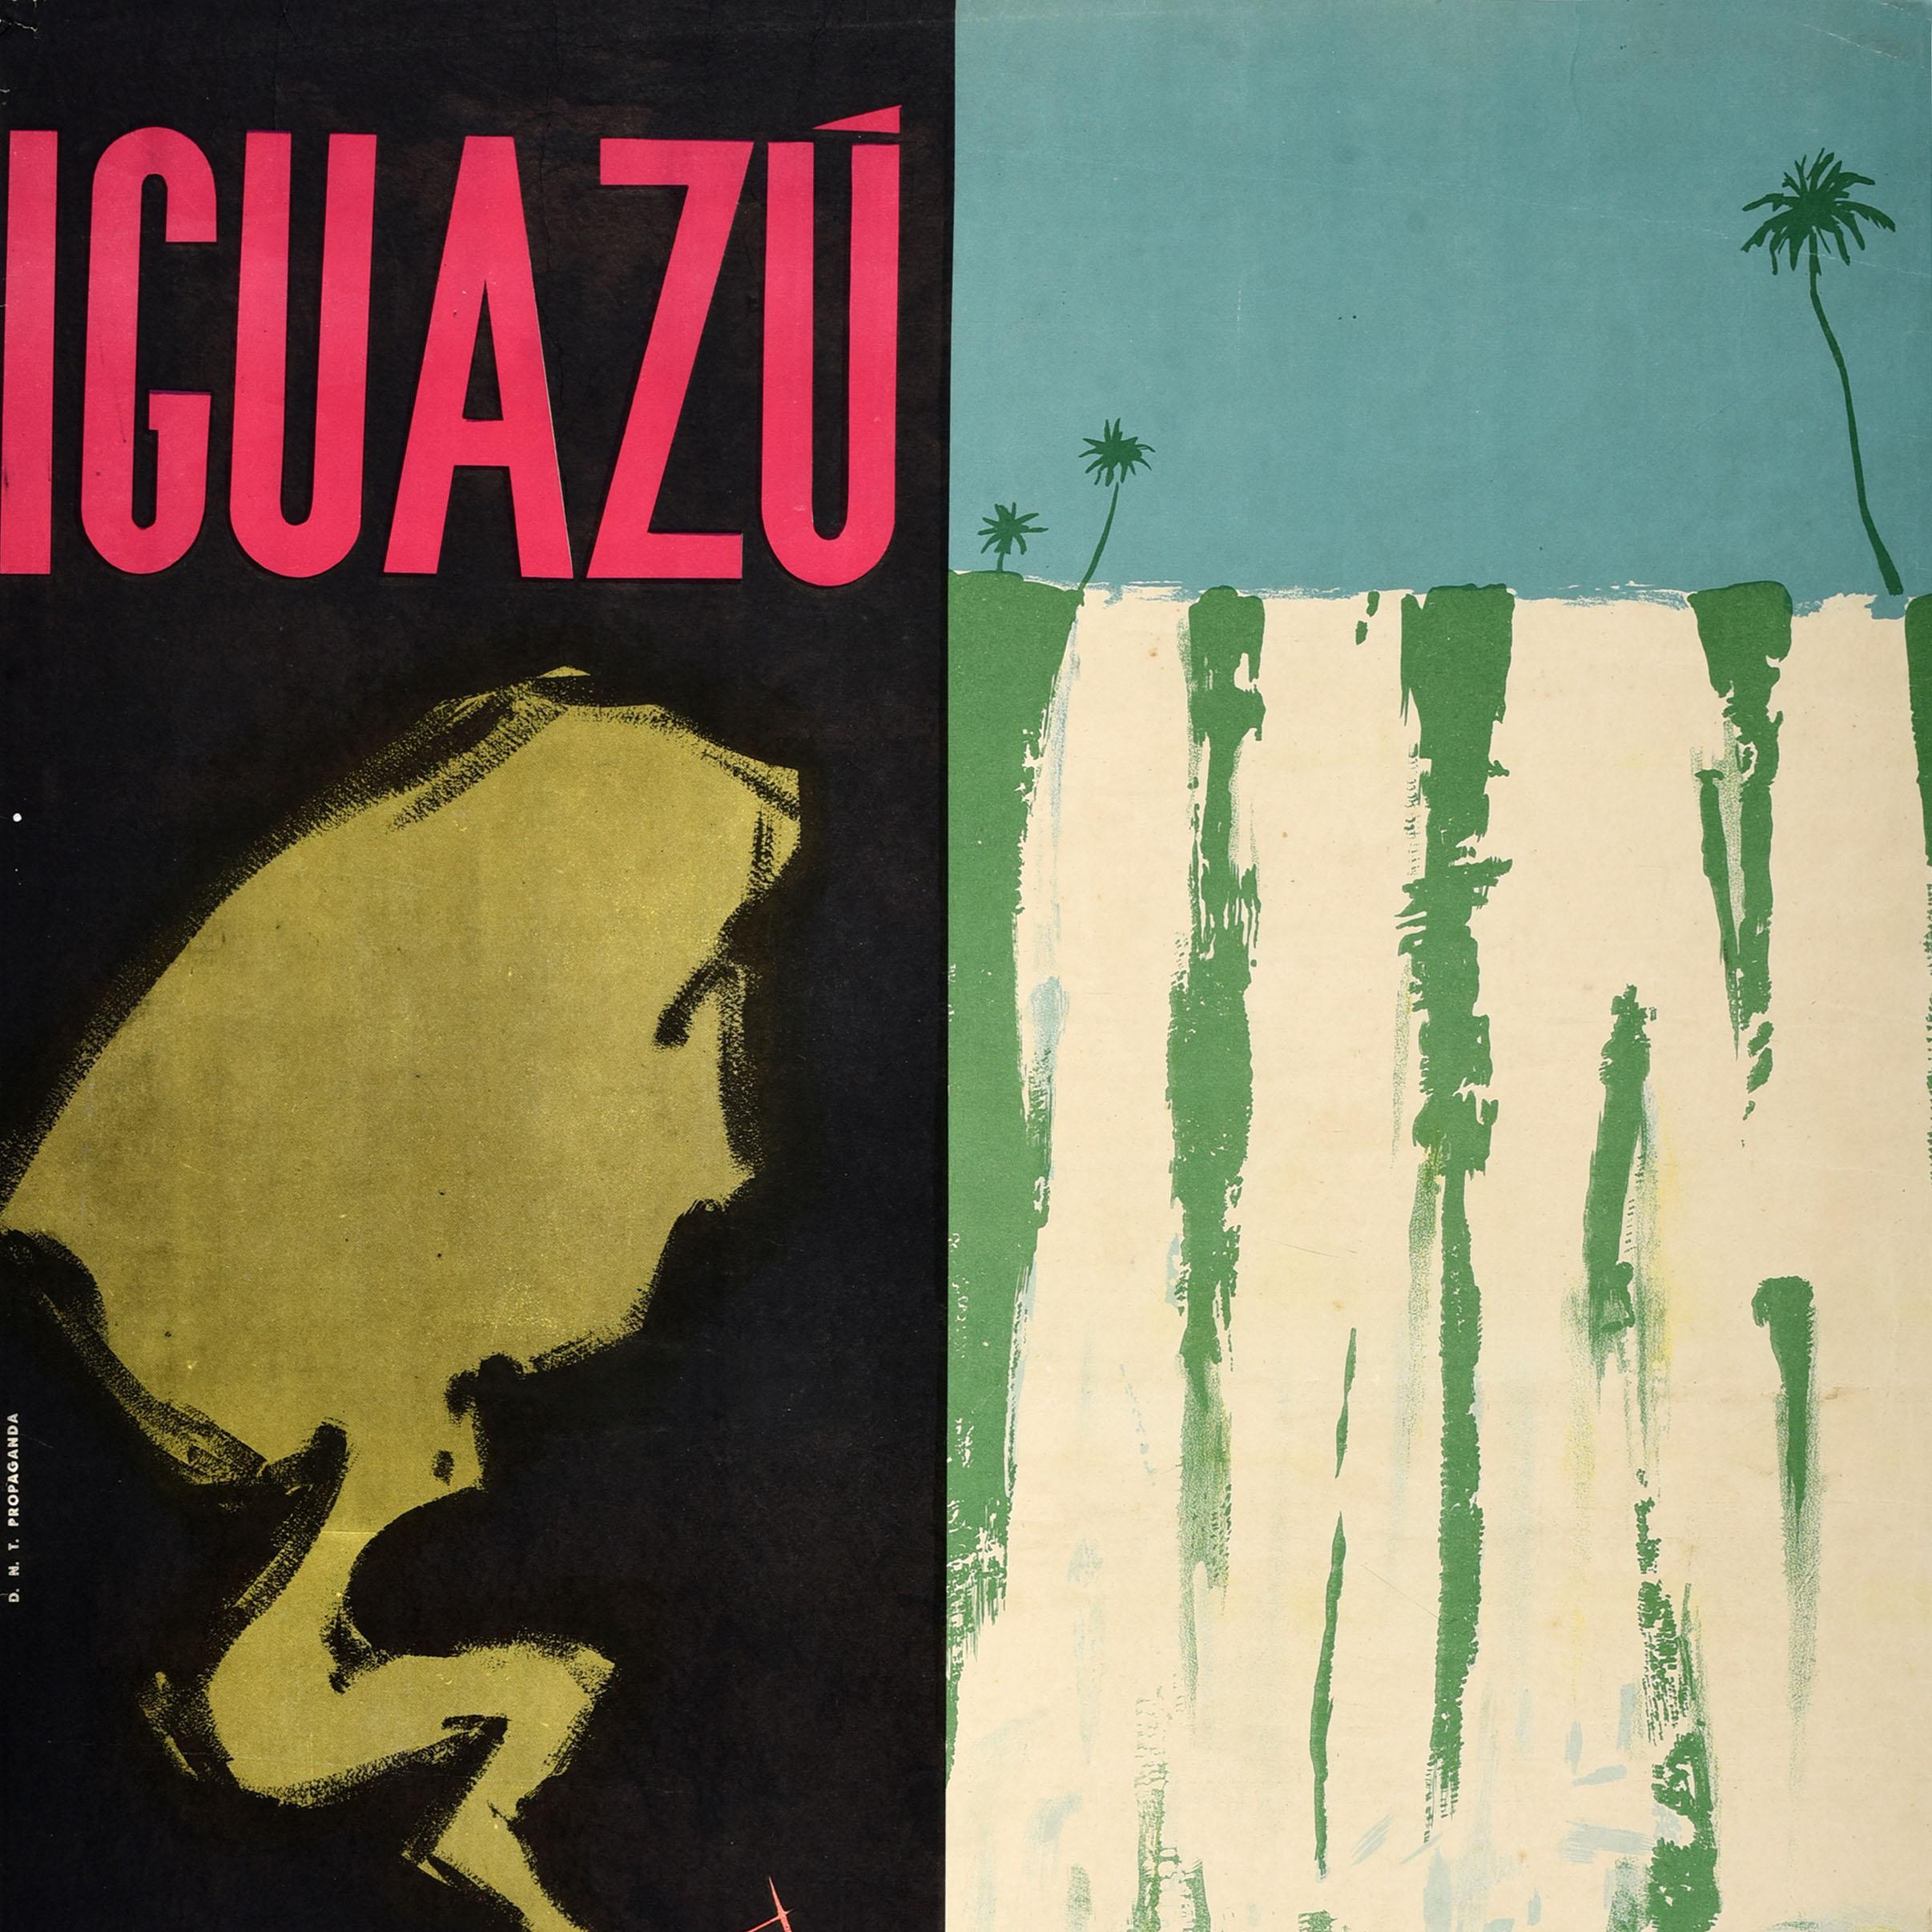 Original vintage travel poster for Iguazu Argentina featuring a red paddle boat steamer sailing on the Iguazu River with the smoke from the funnel forming the shape of South America against a black background on one side and palm trees at the top of